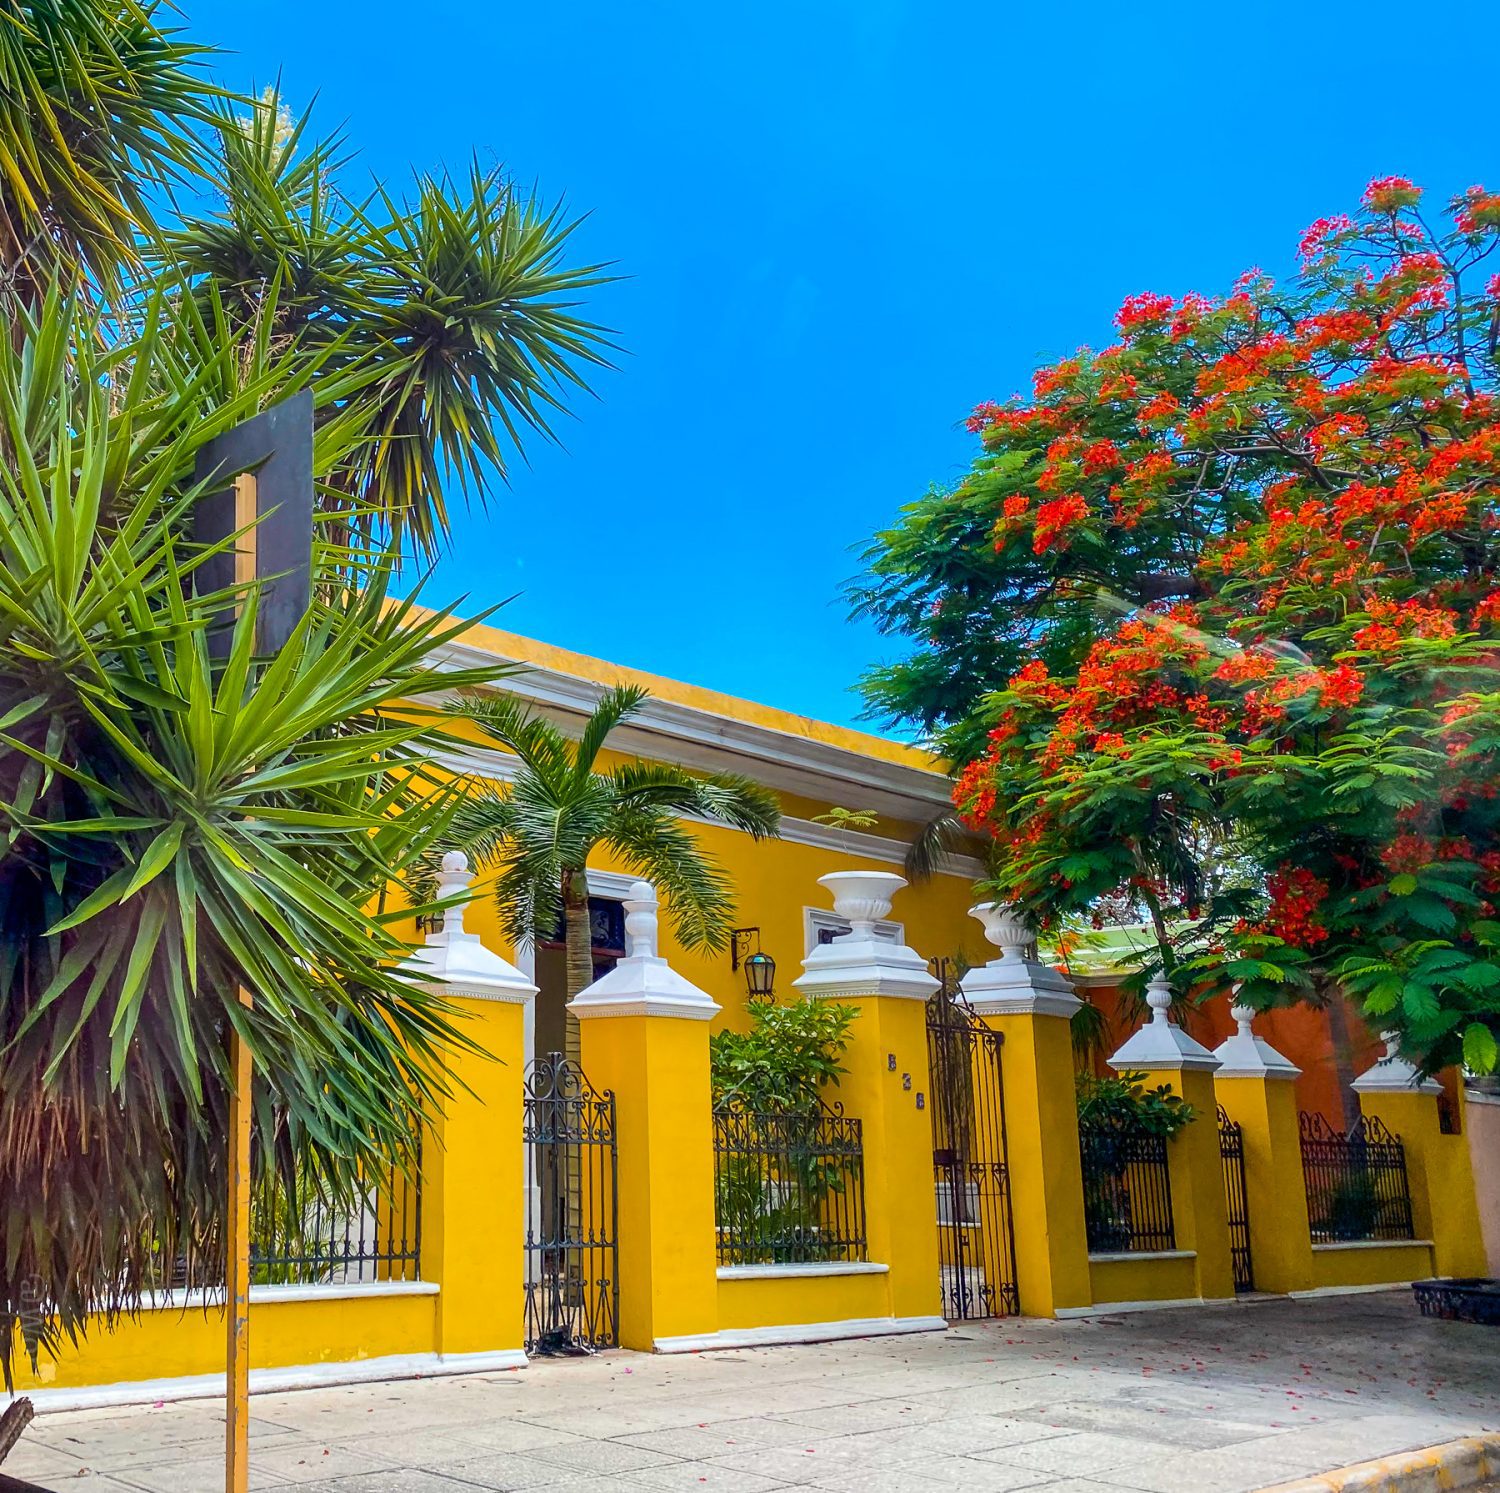 A bright yellow building in Merida.